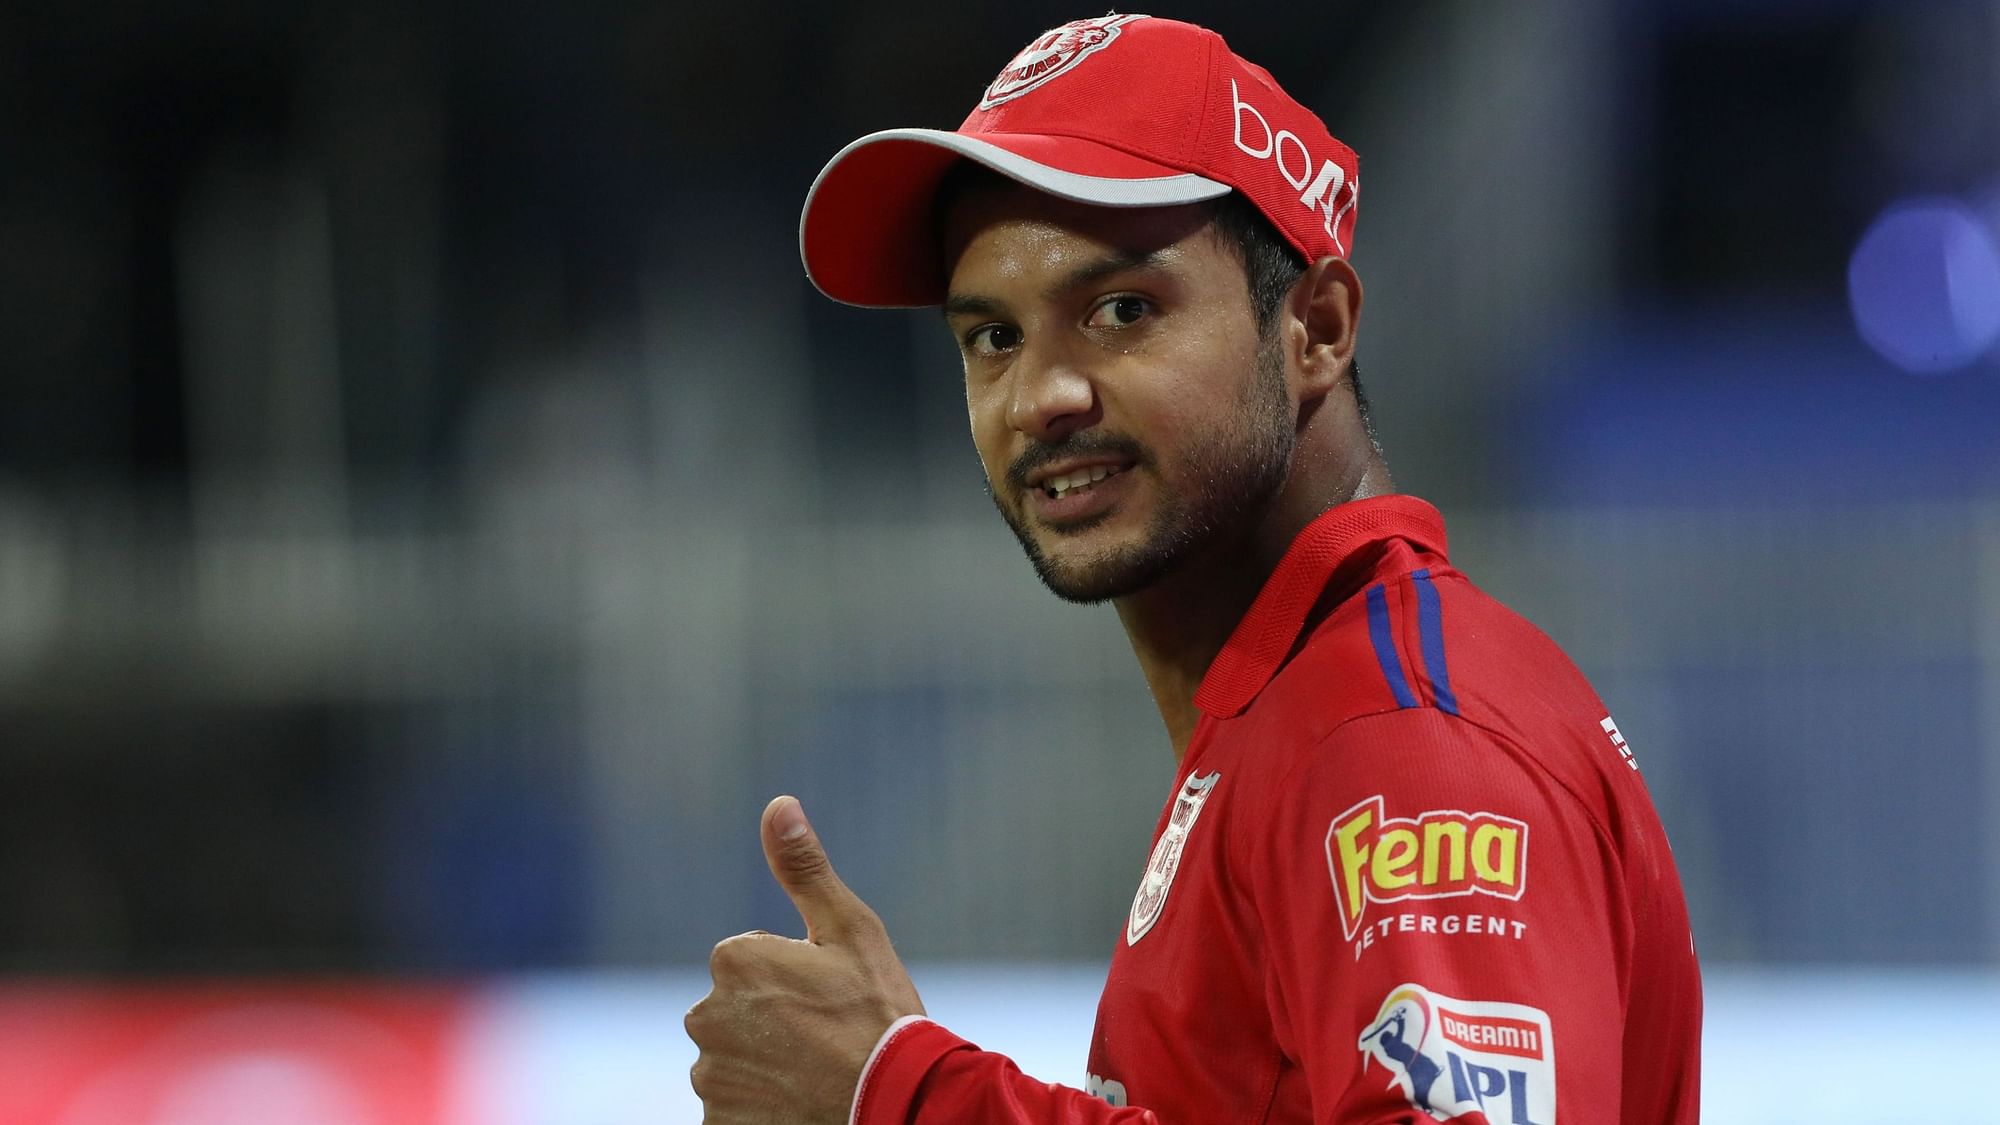 Mayank Agarwal has scored 393 runs in nine games and he holds the 2nd position in the Orange Cap contender’s list in IPL 2020.